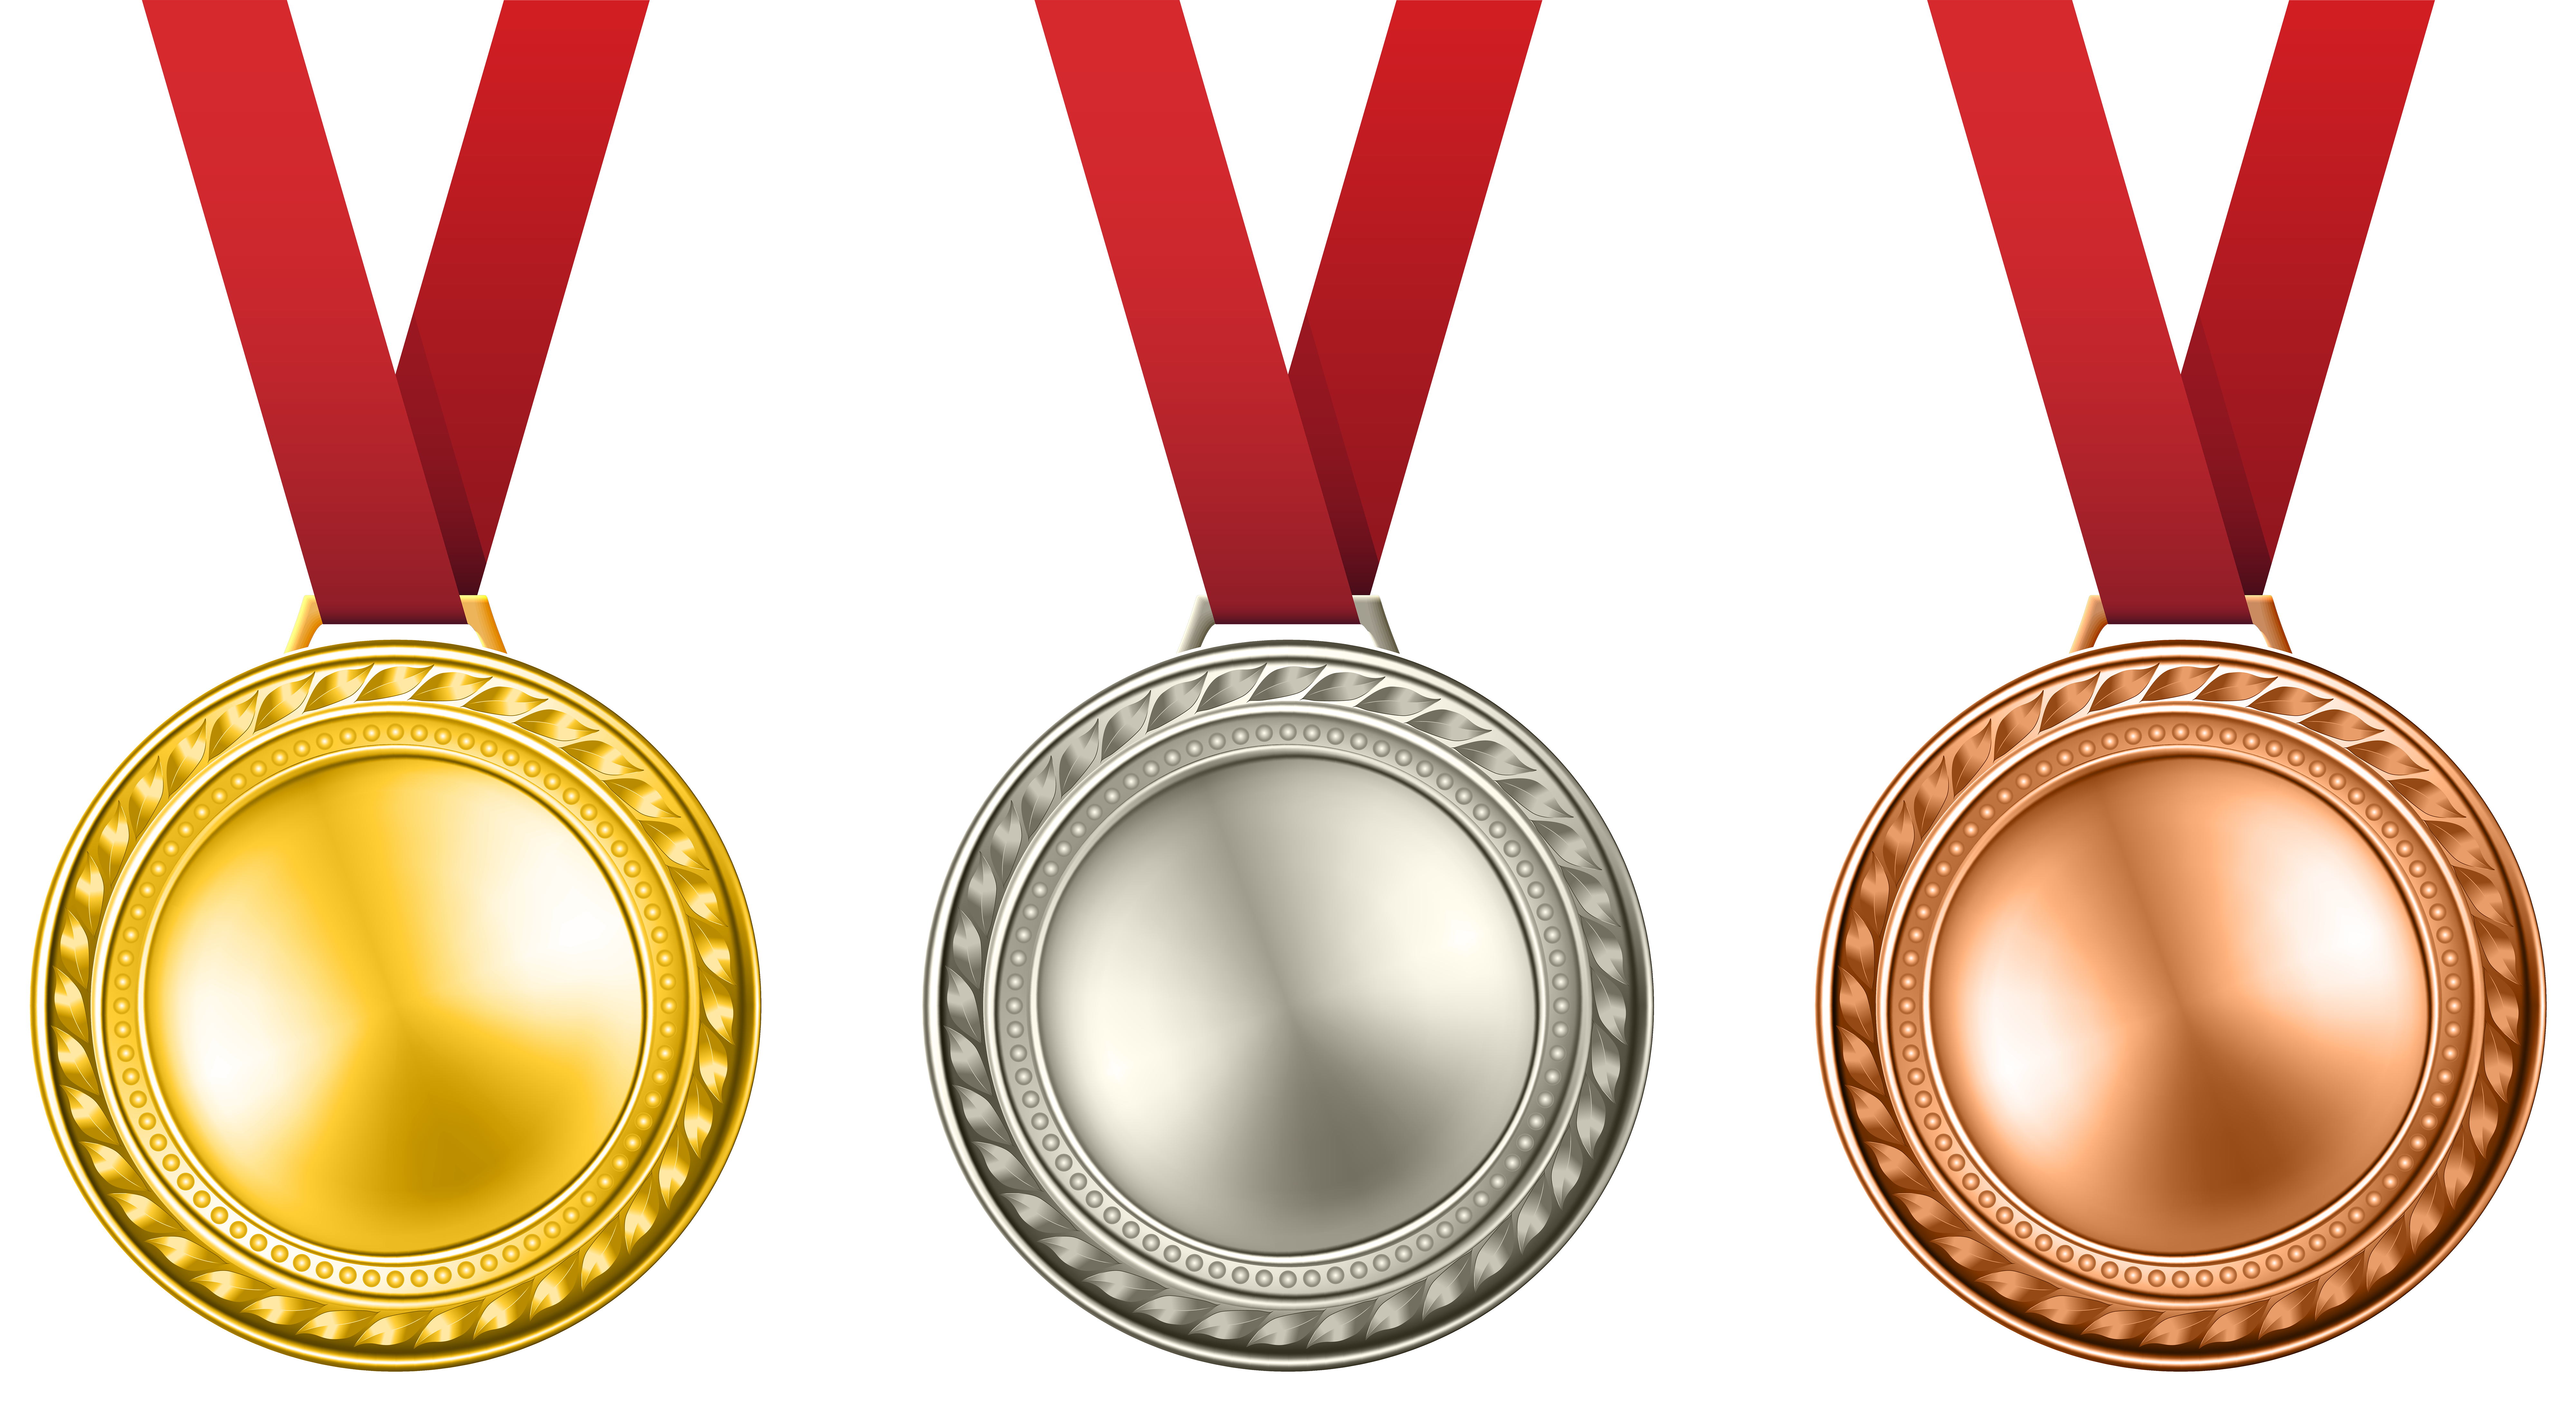 clipart images of medals - photo #18